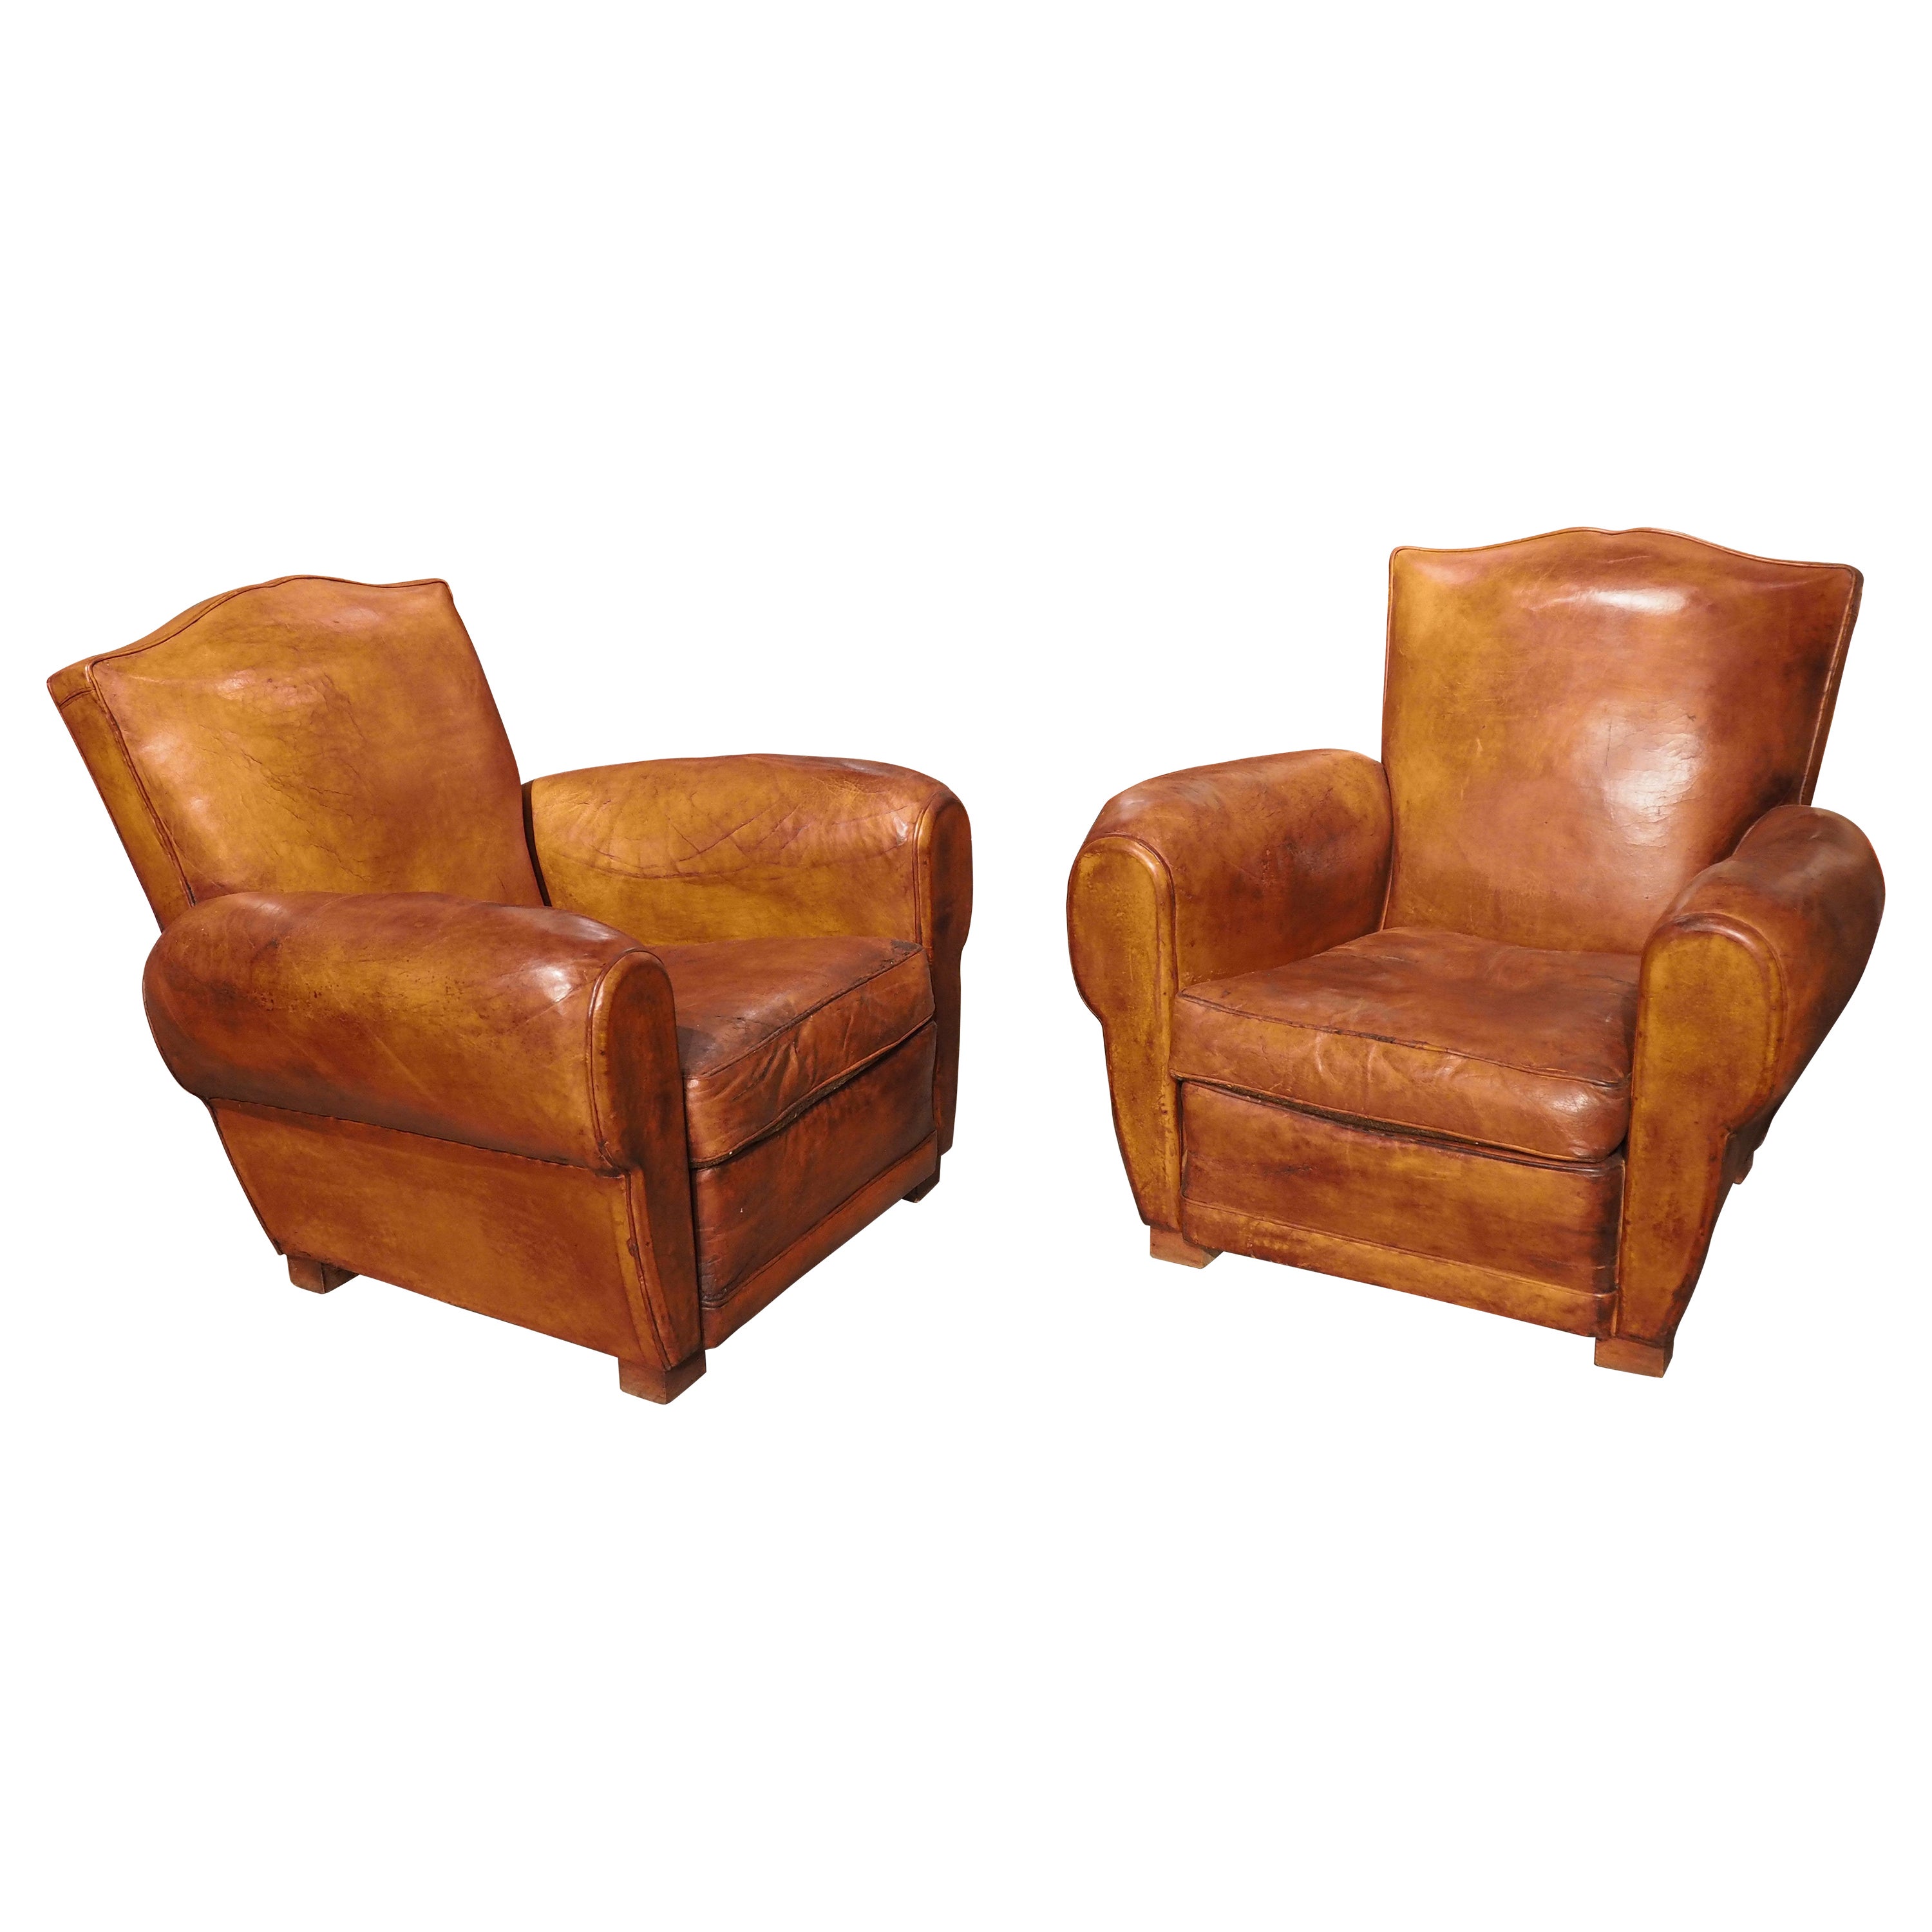 Pair of 1940s French Leather Moustache Back Club Chairs